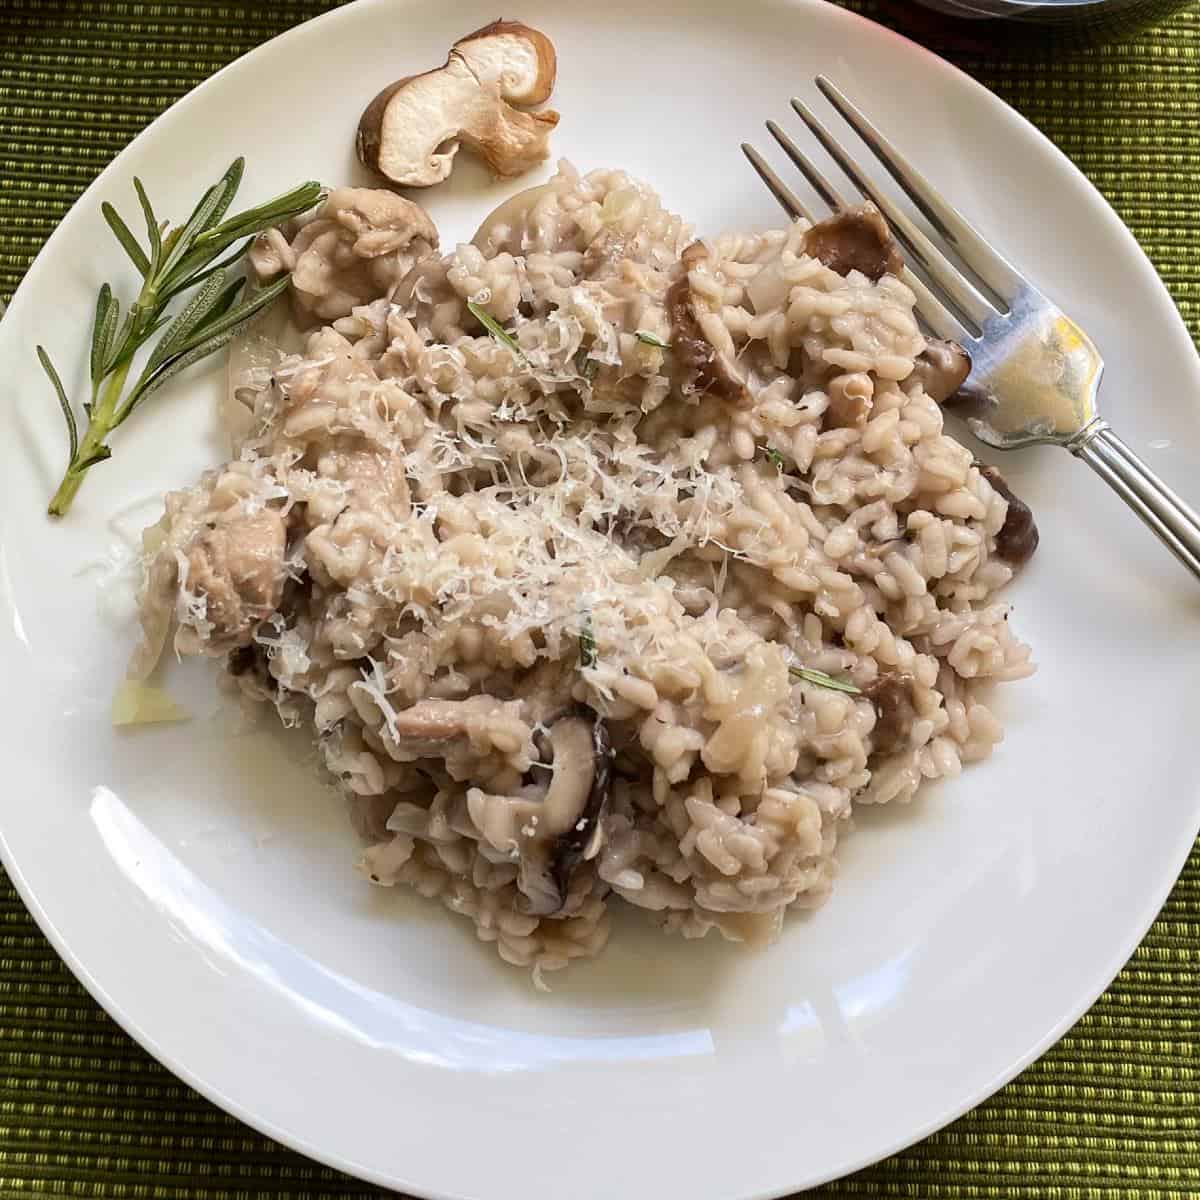 mushroom and chicken risotto on a white plate with a sprig of rosemary on the side.